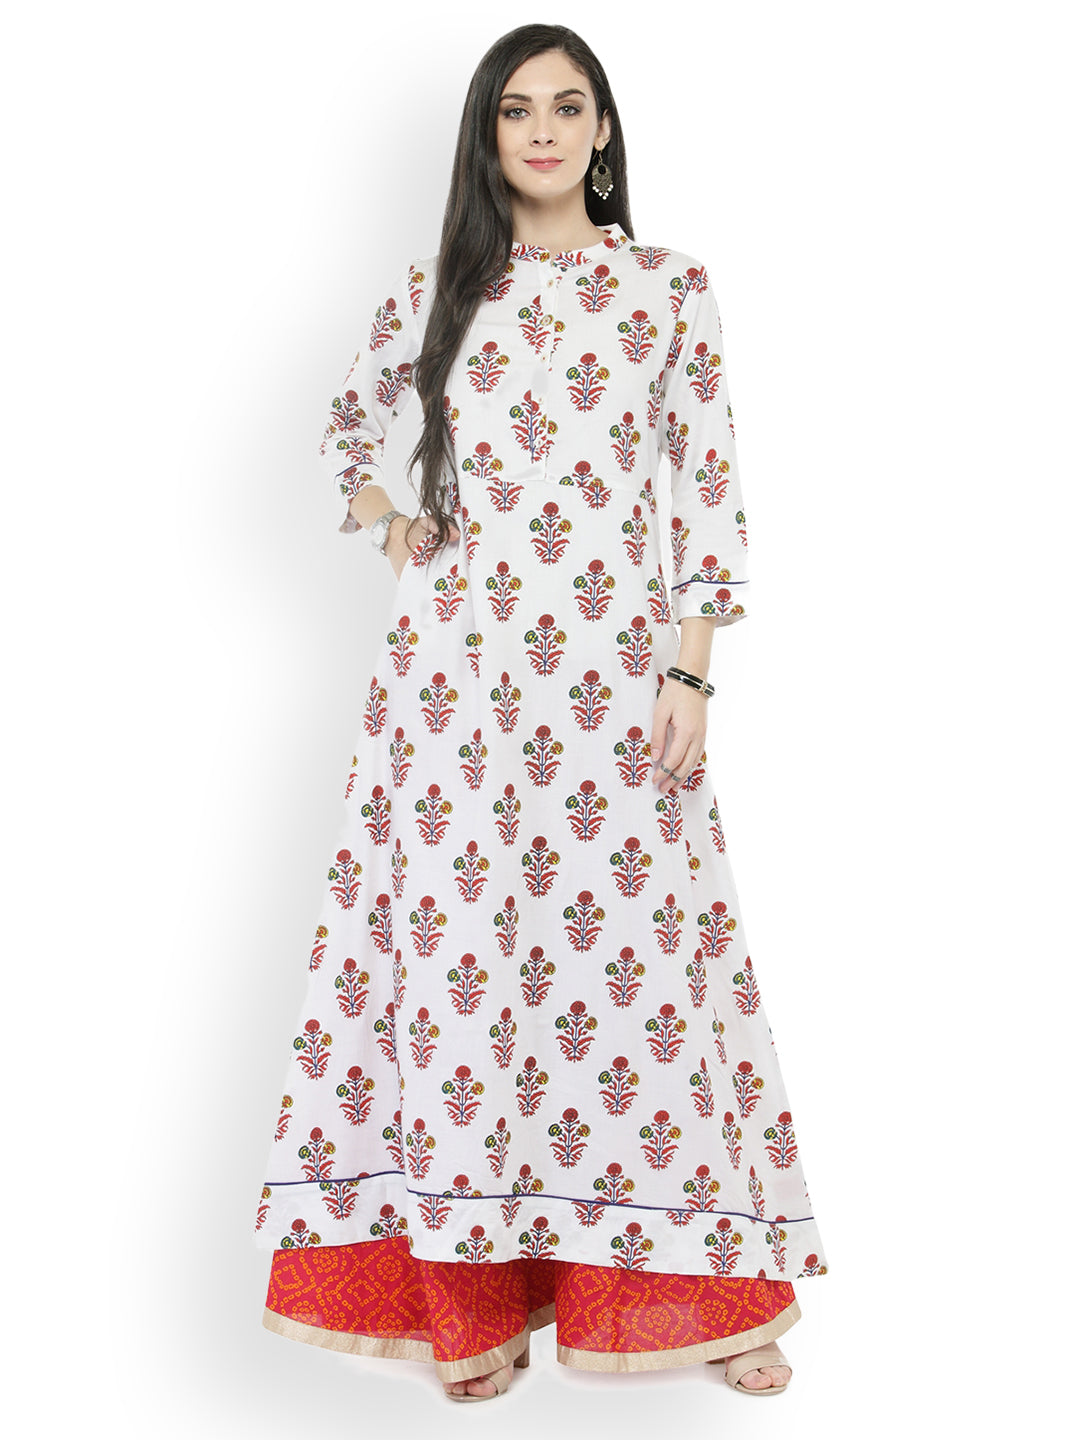 https://ladyindia.com/products/buy-now-floral-print-long-anarkalis-white-floral-printed-long-kurta-with-palazzos?variant=7878391726124